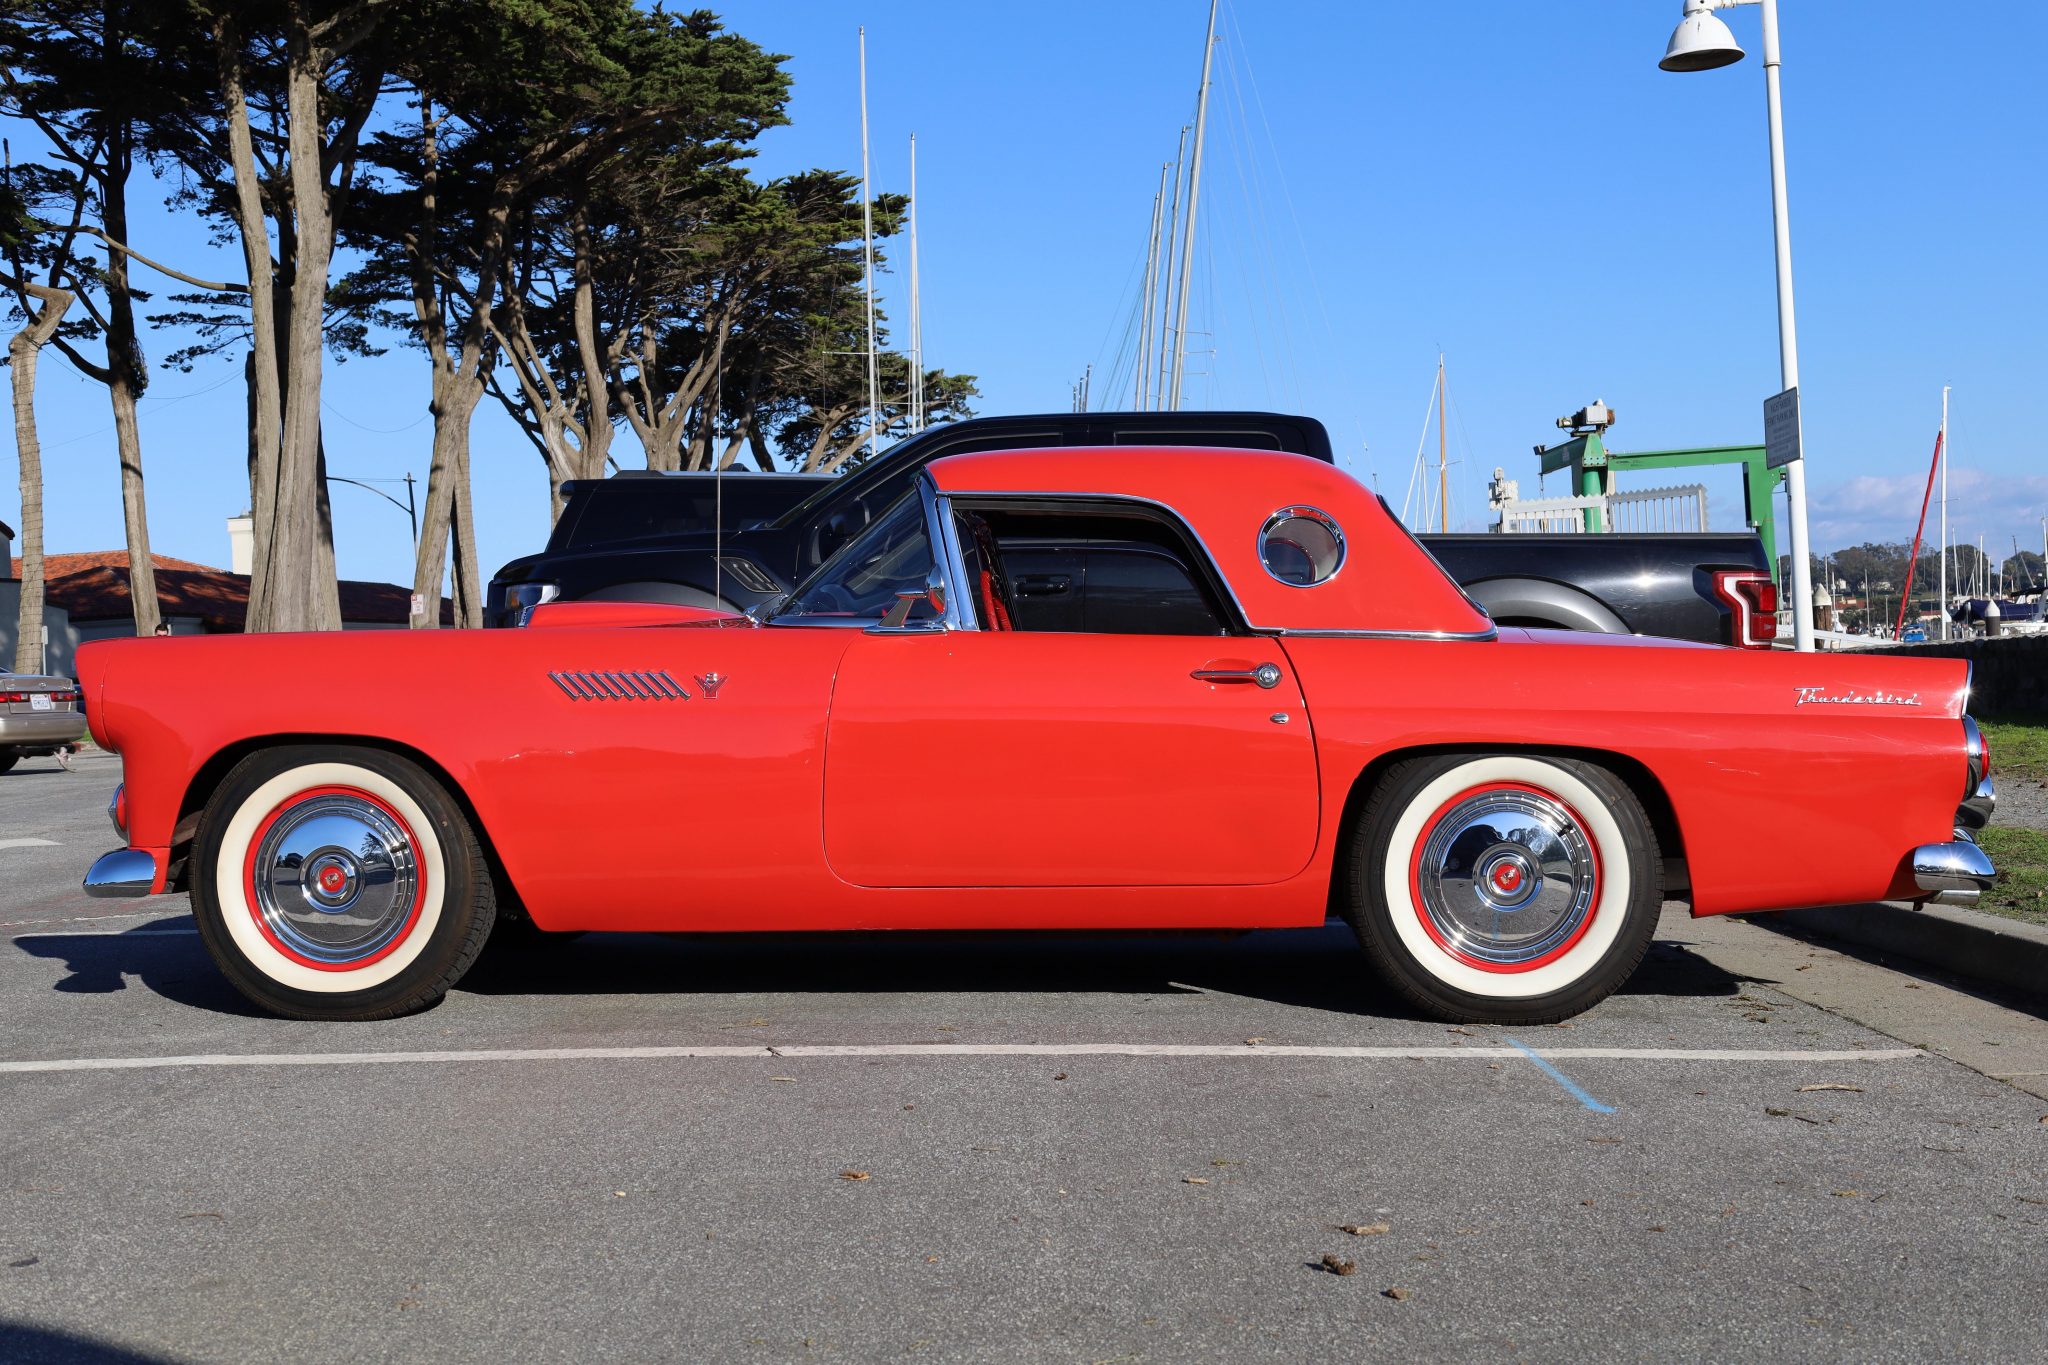 1955 Ford Thunderbird Side View Torch Red